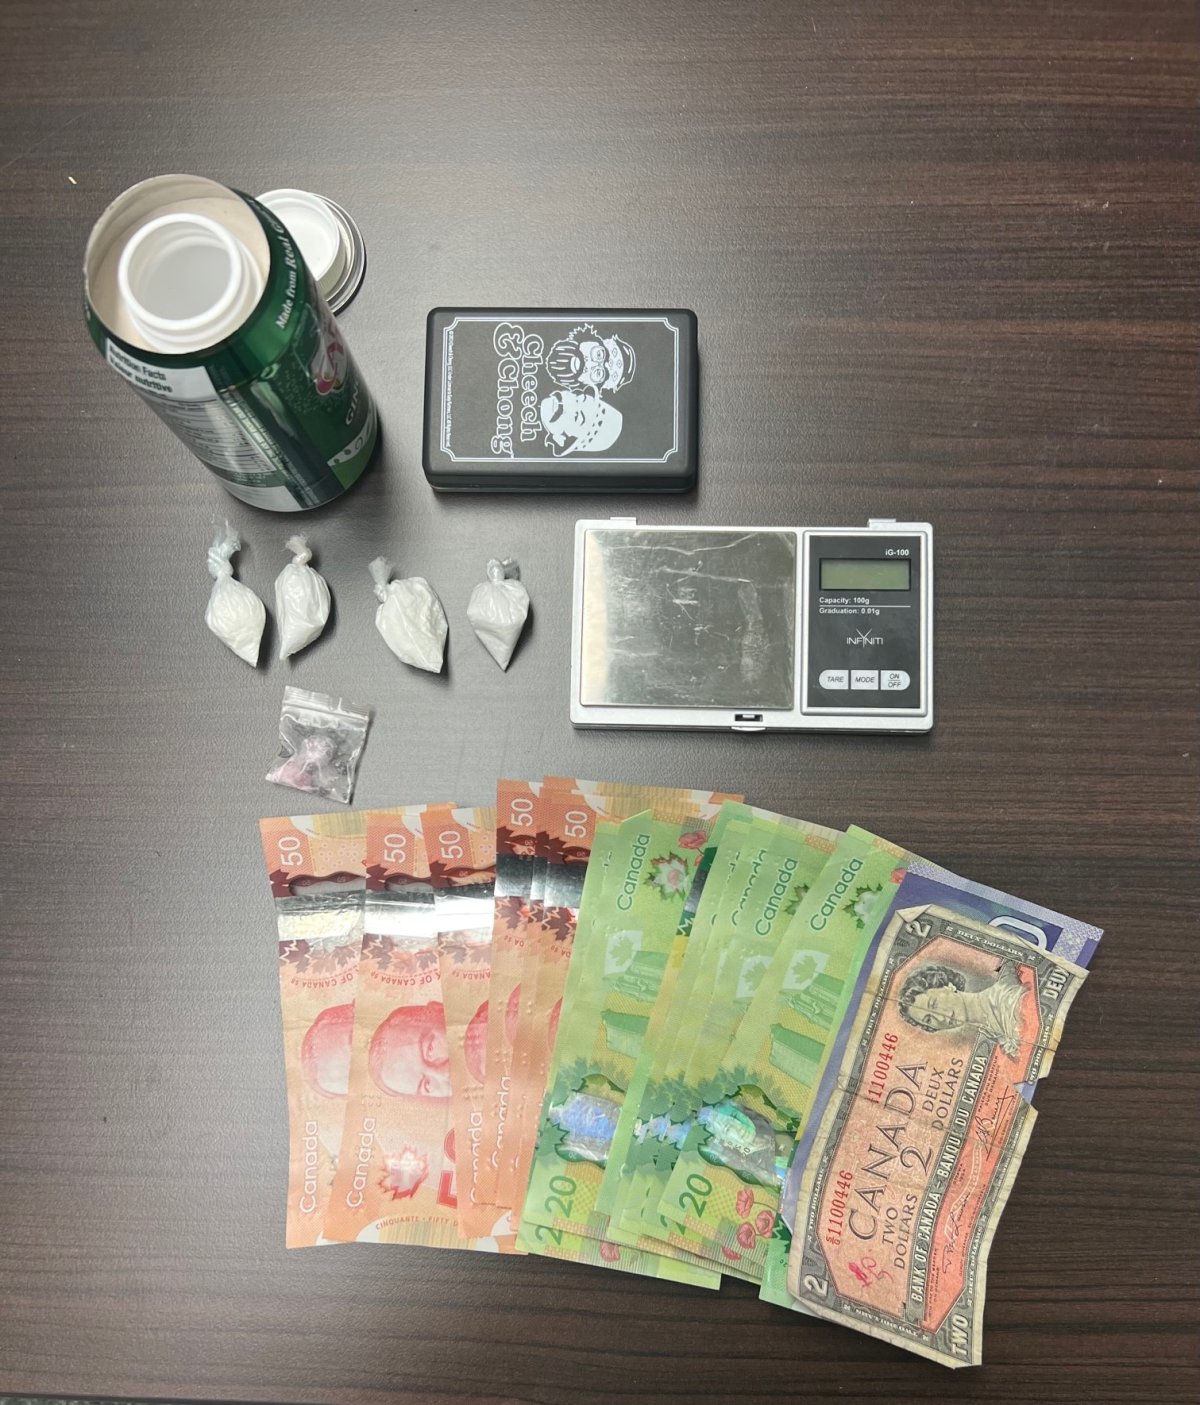 Contraband seized by Manitoba RCMP.